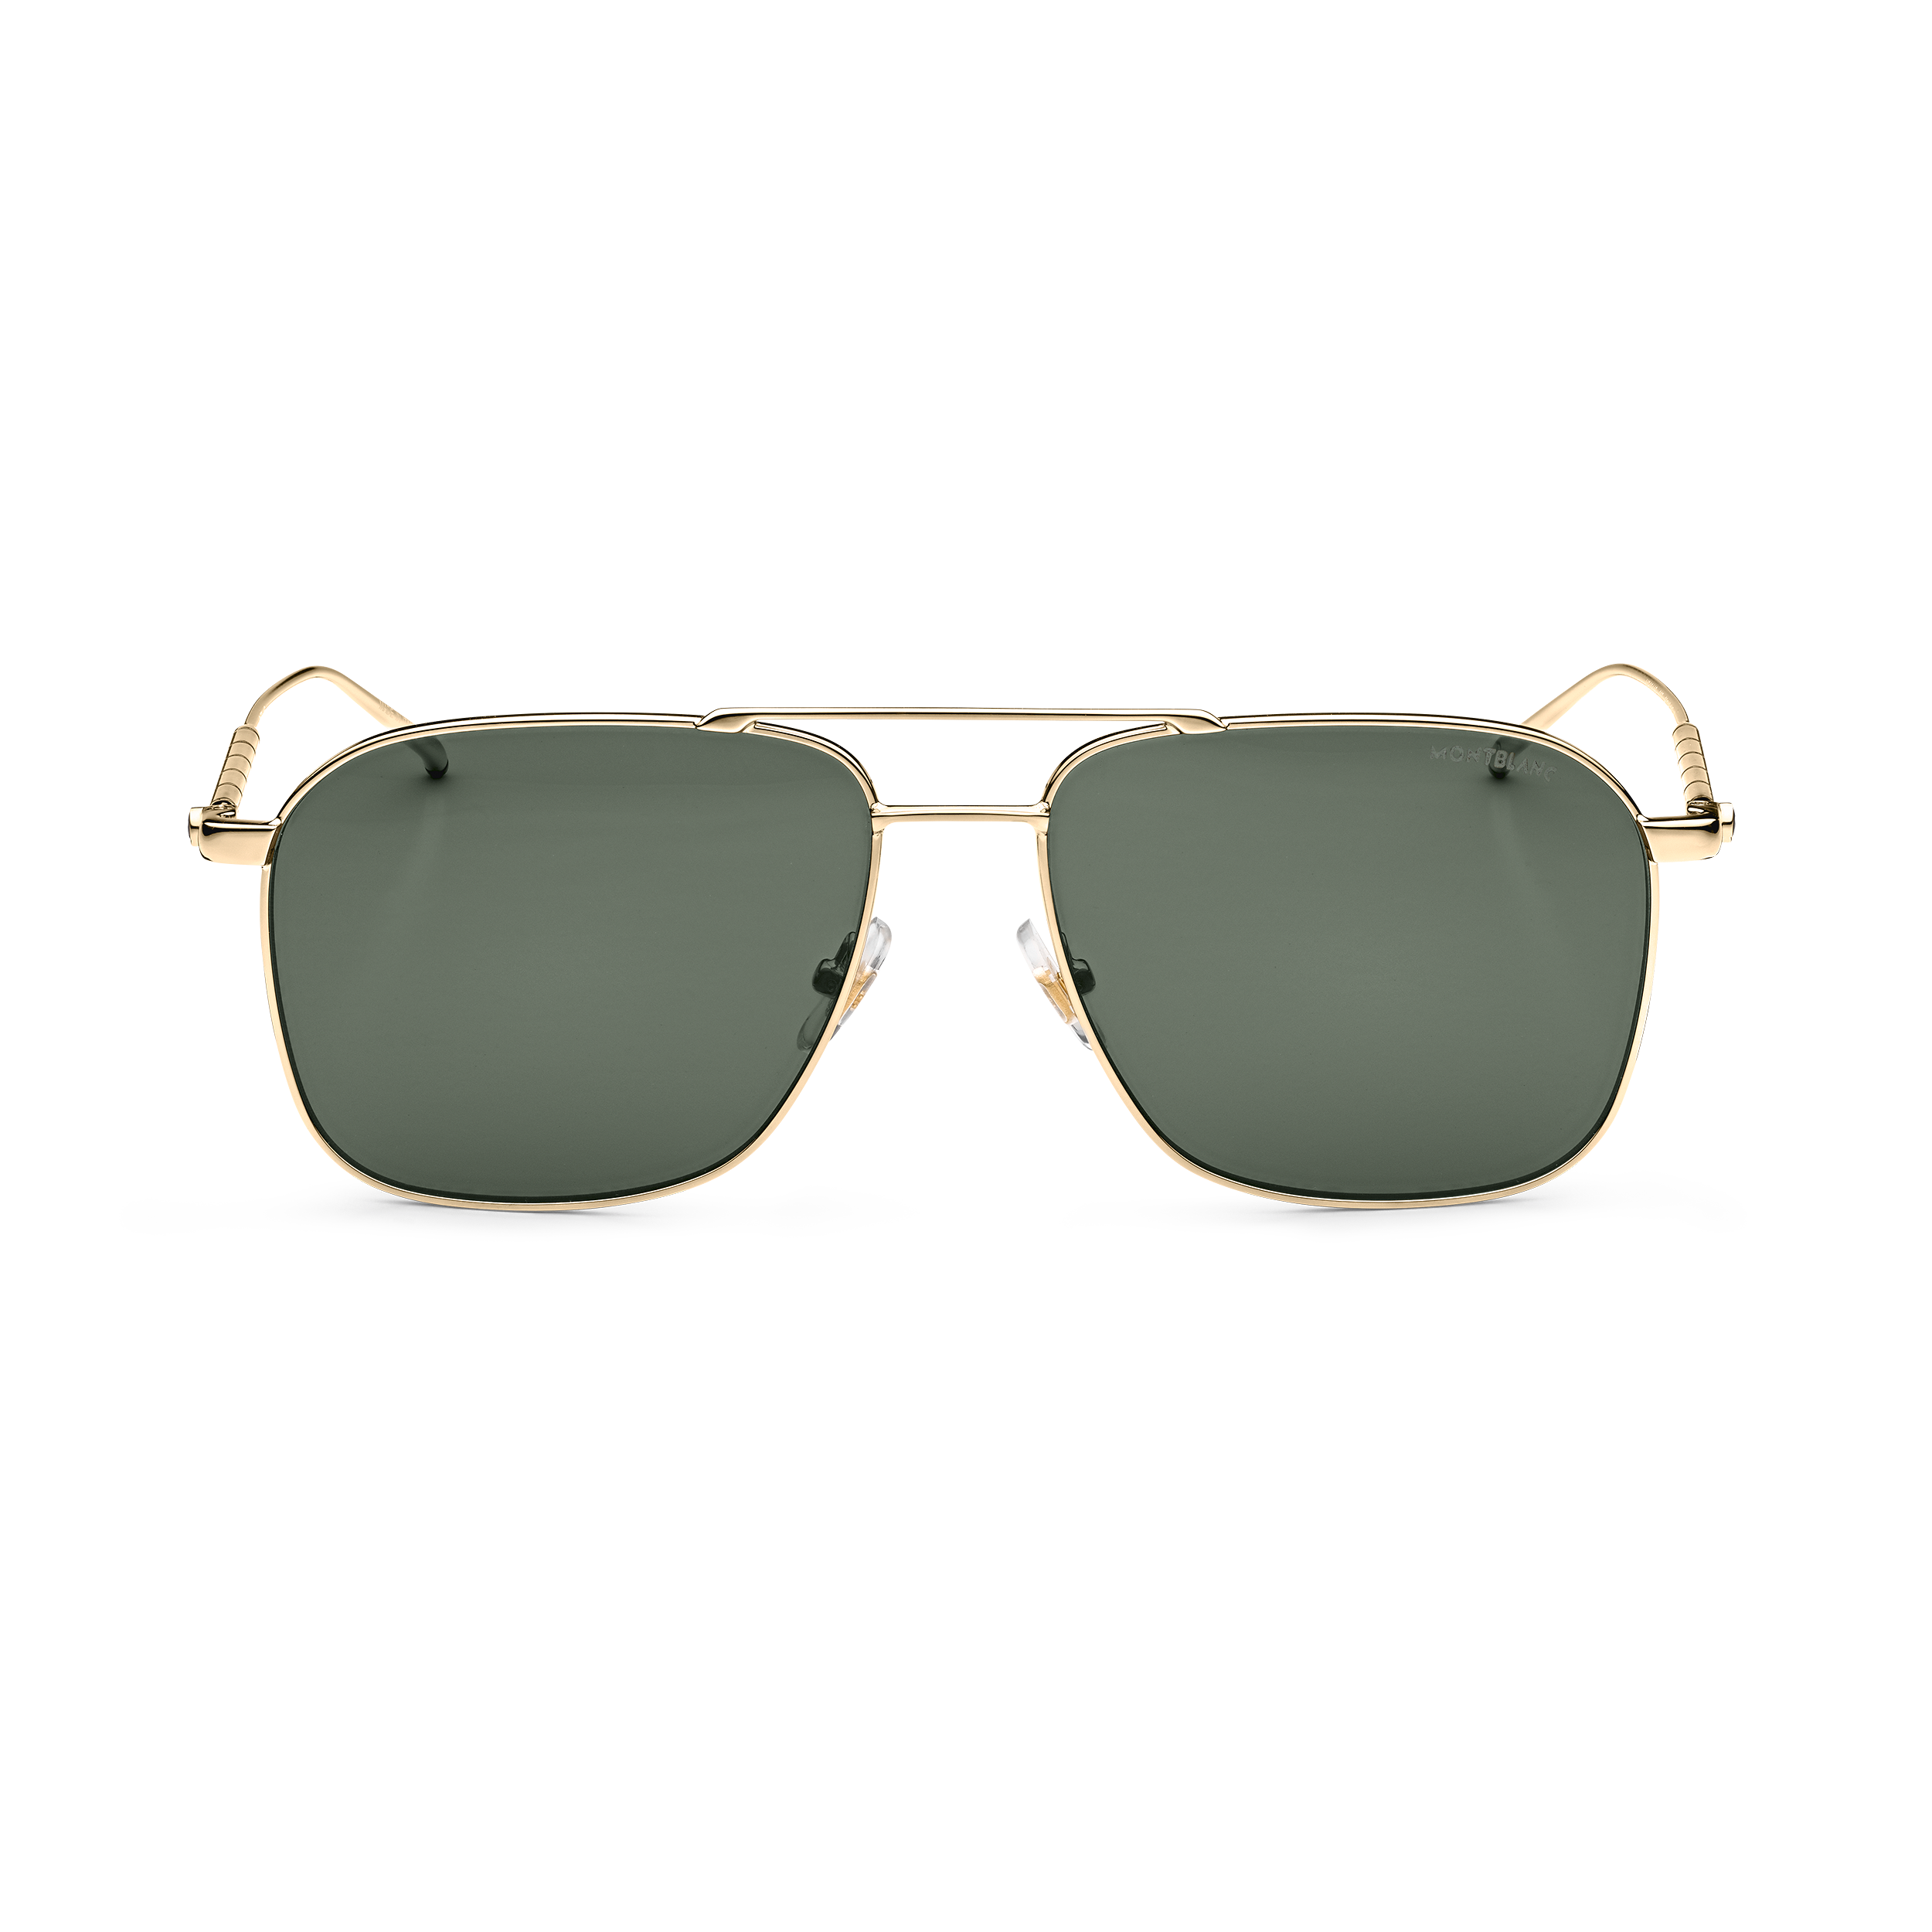 Rectangular Sunglasses with Gold-Colored Metal Frame, image 1